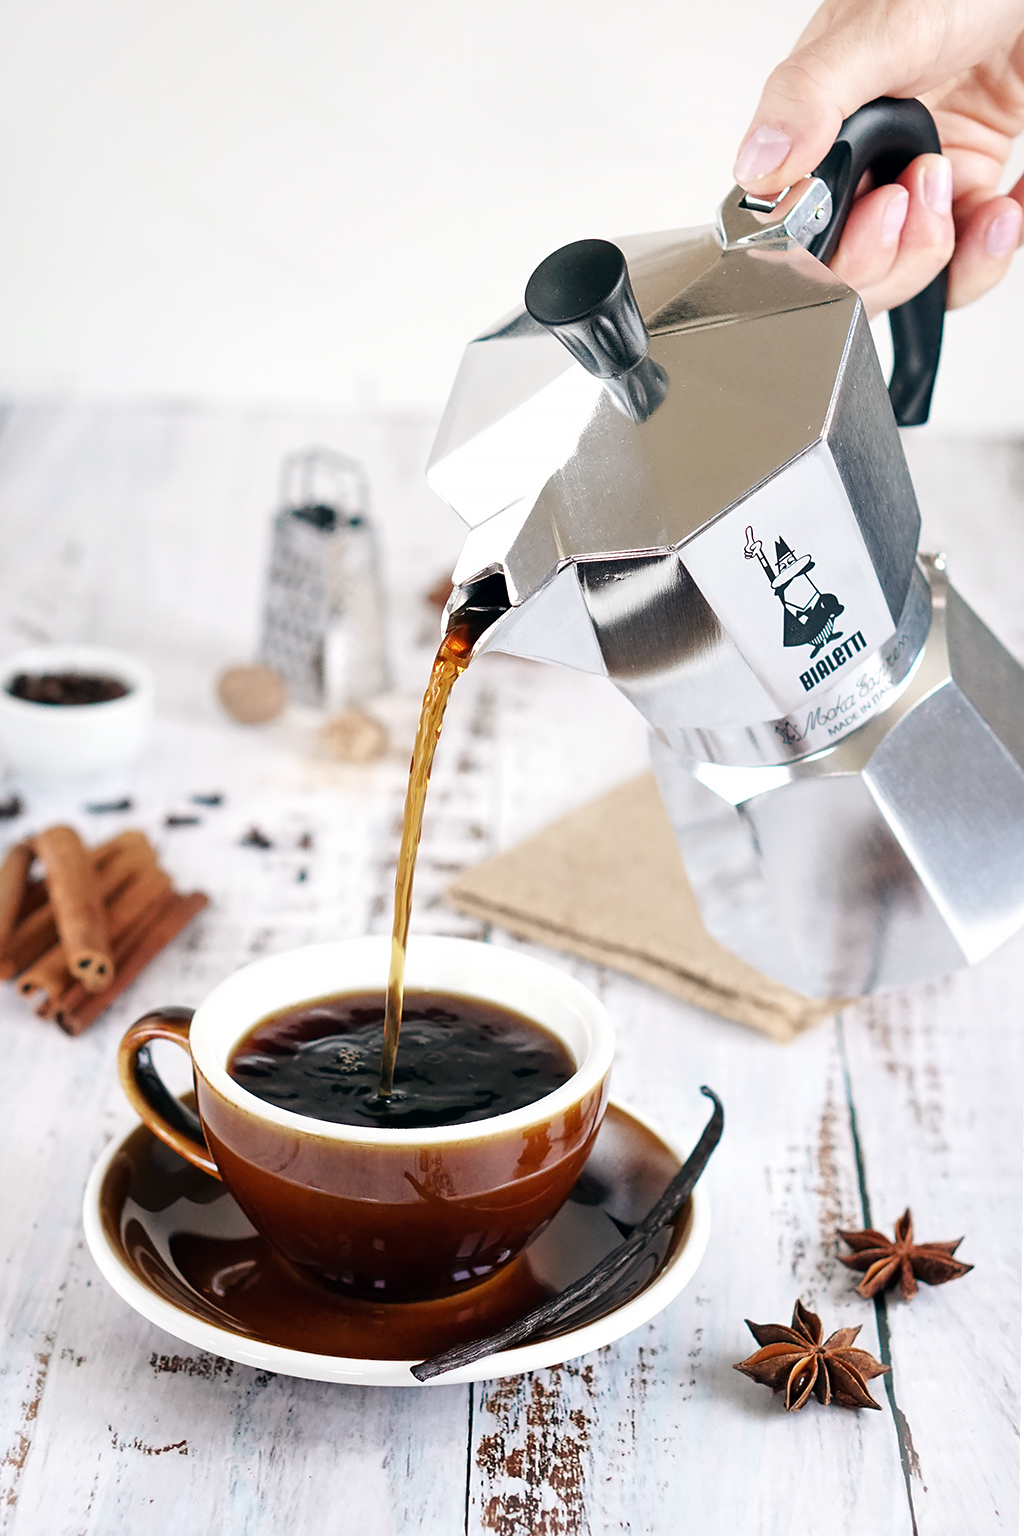 Bialetti moka pot and coffee with spices